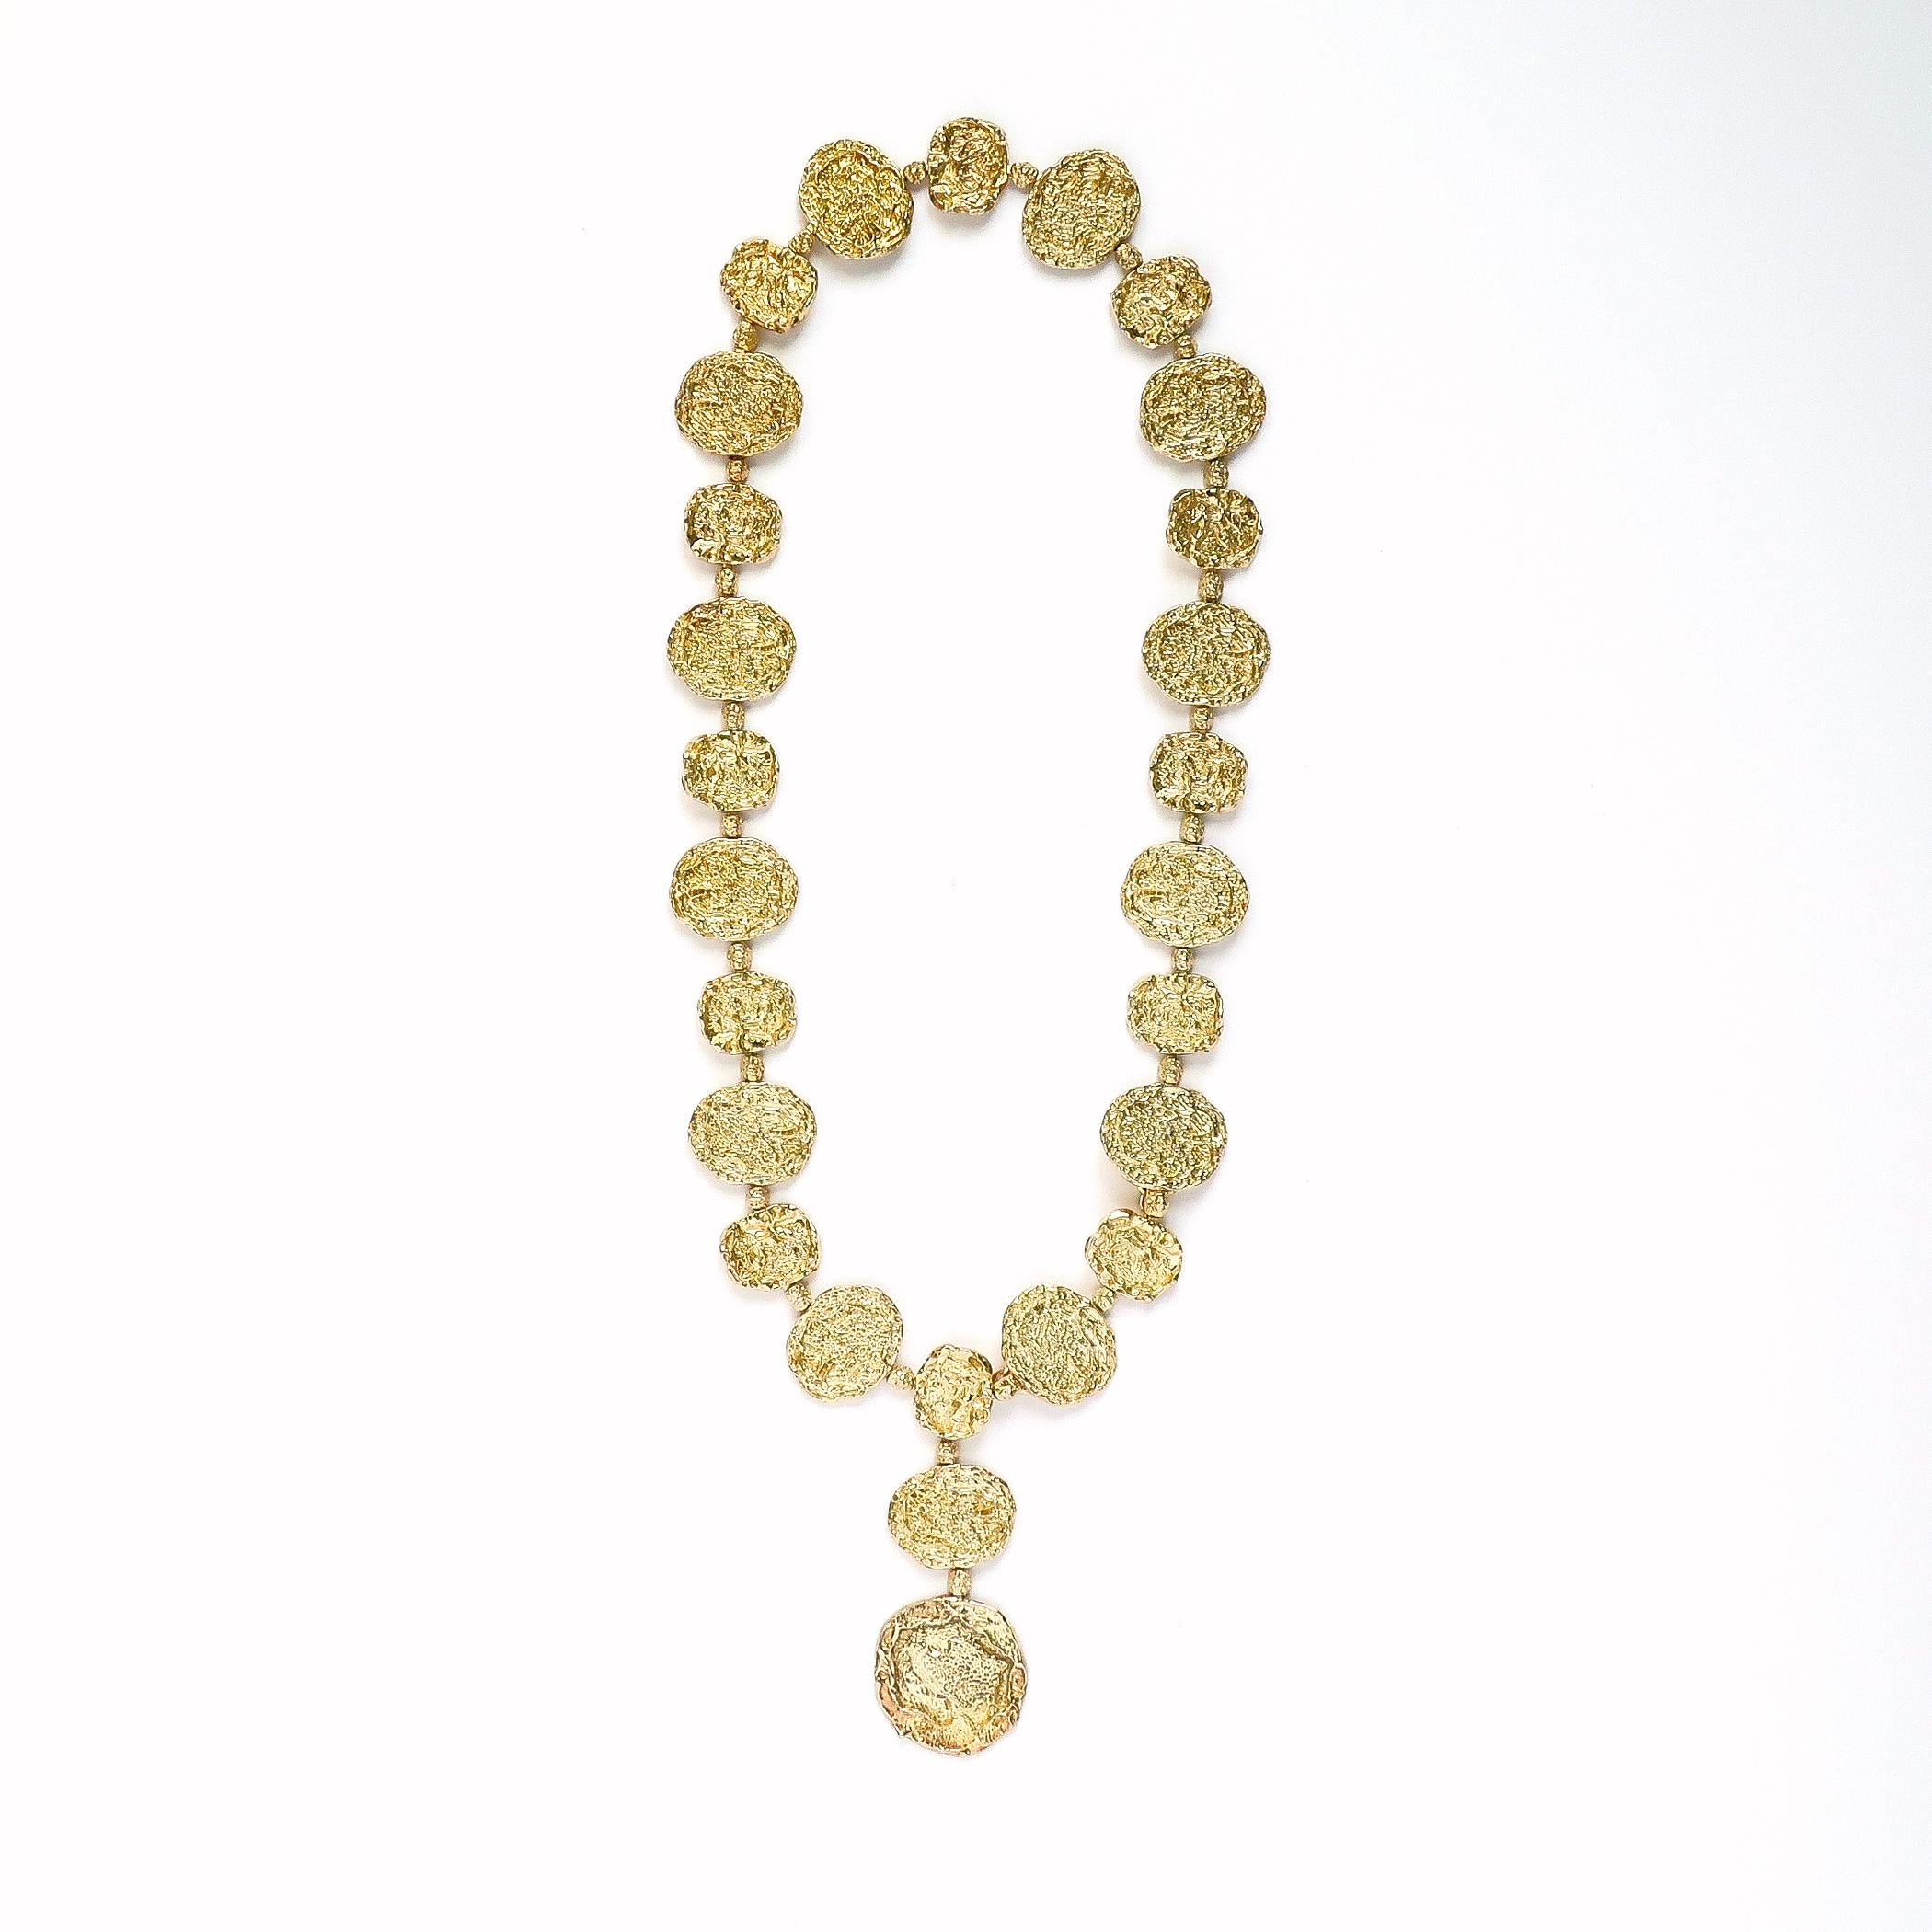 Cartier vermeil (gold on sterling silver) belt comprised of textured circular discs in the brutalist style, designed, circa 1972. Examples of this belt were owned by Jacqueline Kennedy Onassis and Elizabeth Taylor.

This example is longer than